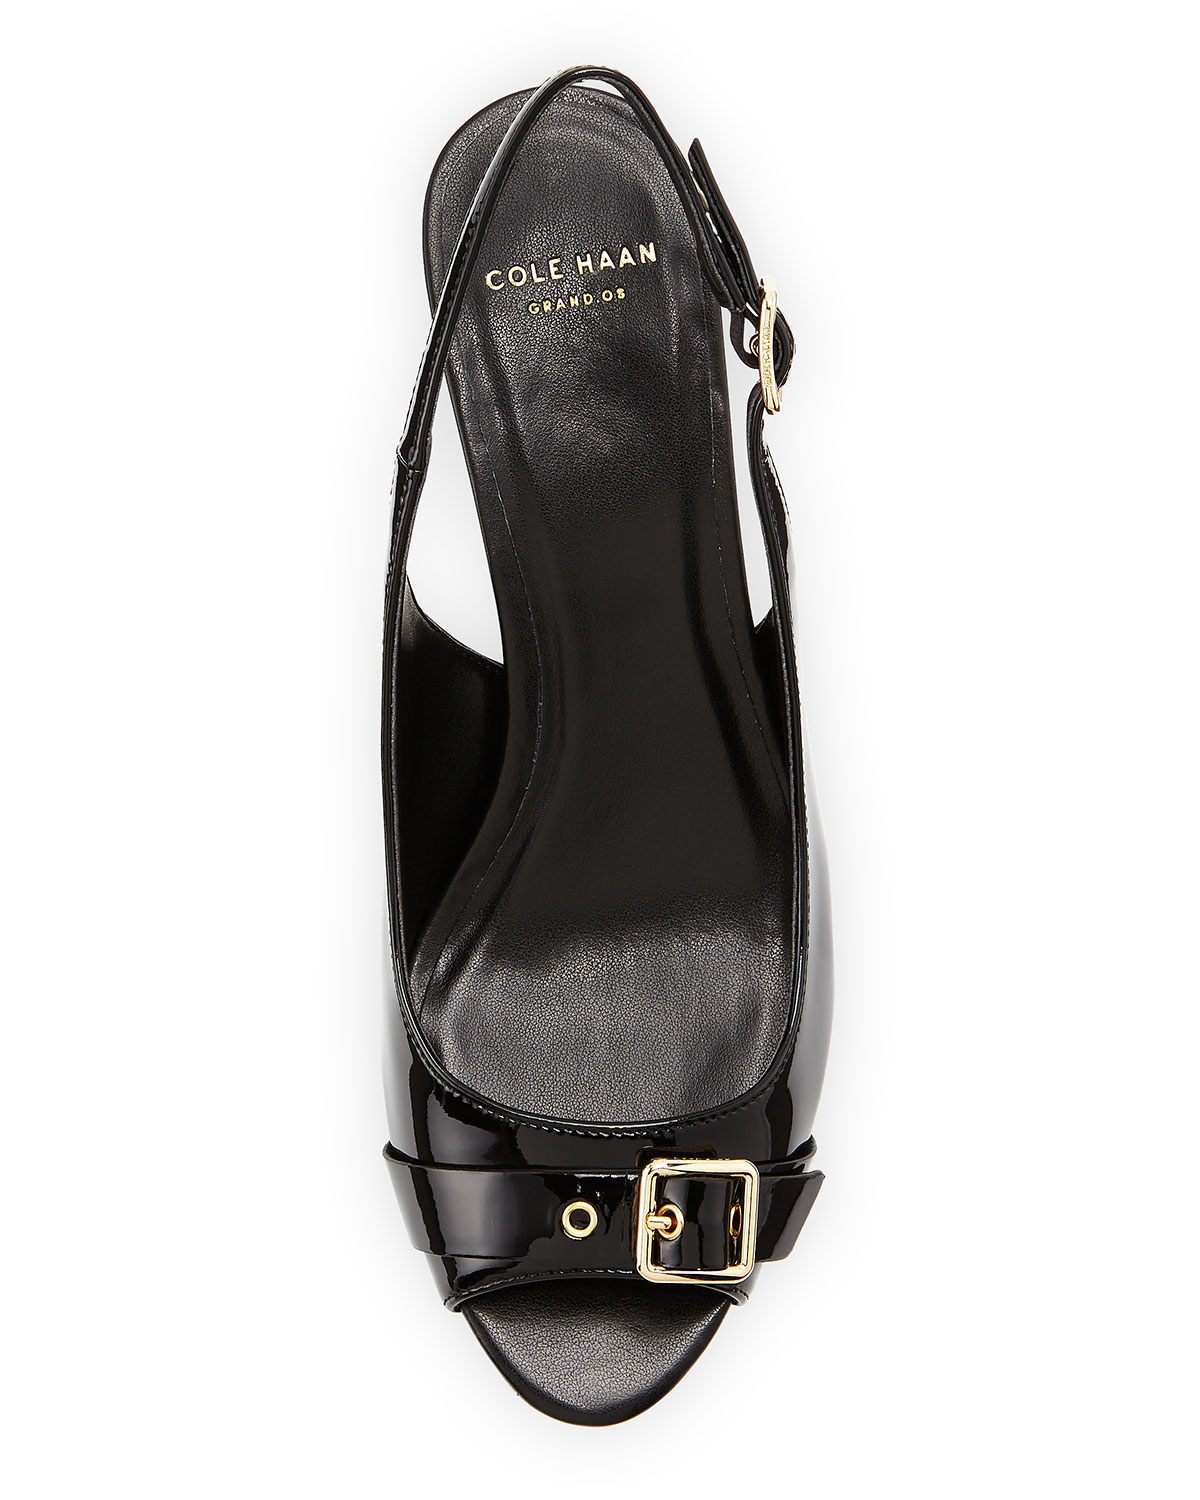 Cole haan Wilma Patent-leather Slingback Pump in Black | Lyst